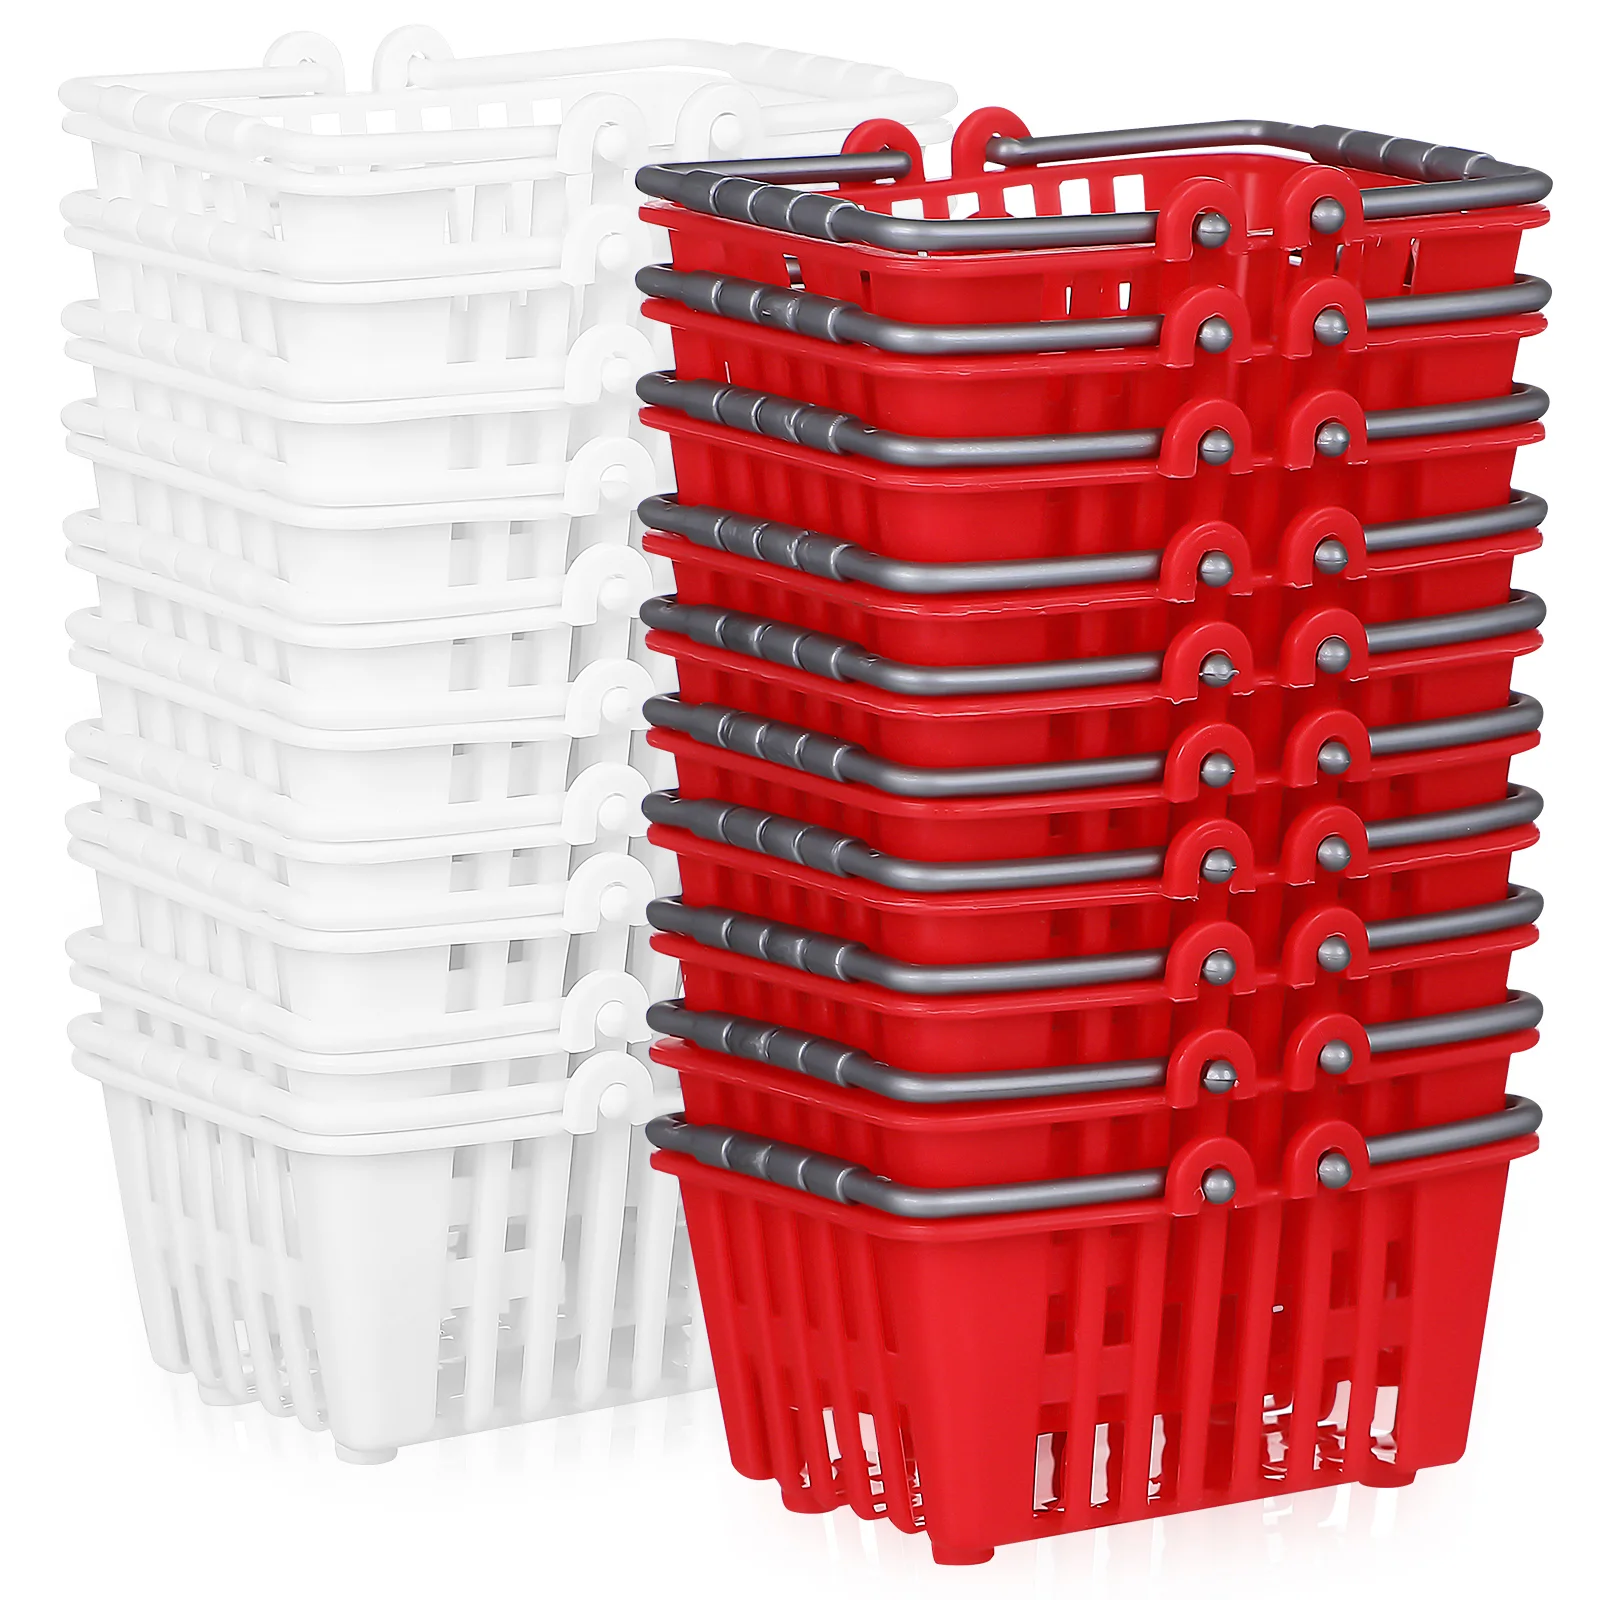 20 Pcs Small Supermarket Baskets Simulation Tiny Shopping Baskets Models Ornaments Toys House Decorations 24 pcs childrens toys road sign barricade traffic cones small signs and decorations fence models educational learning